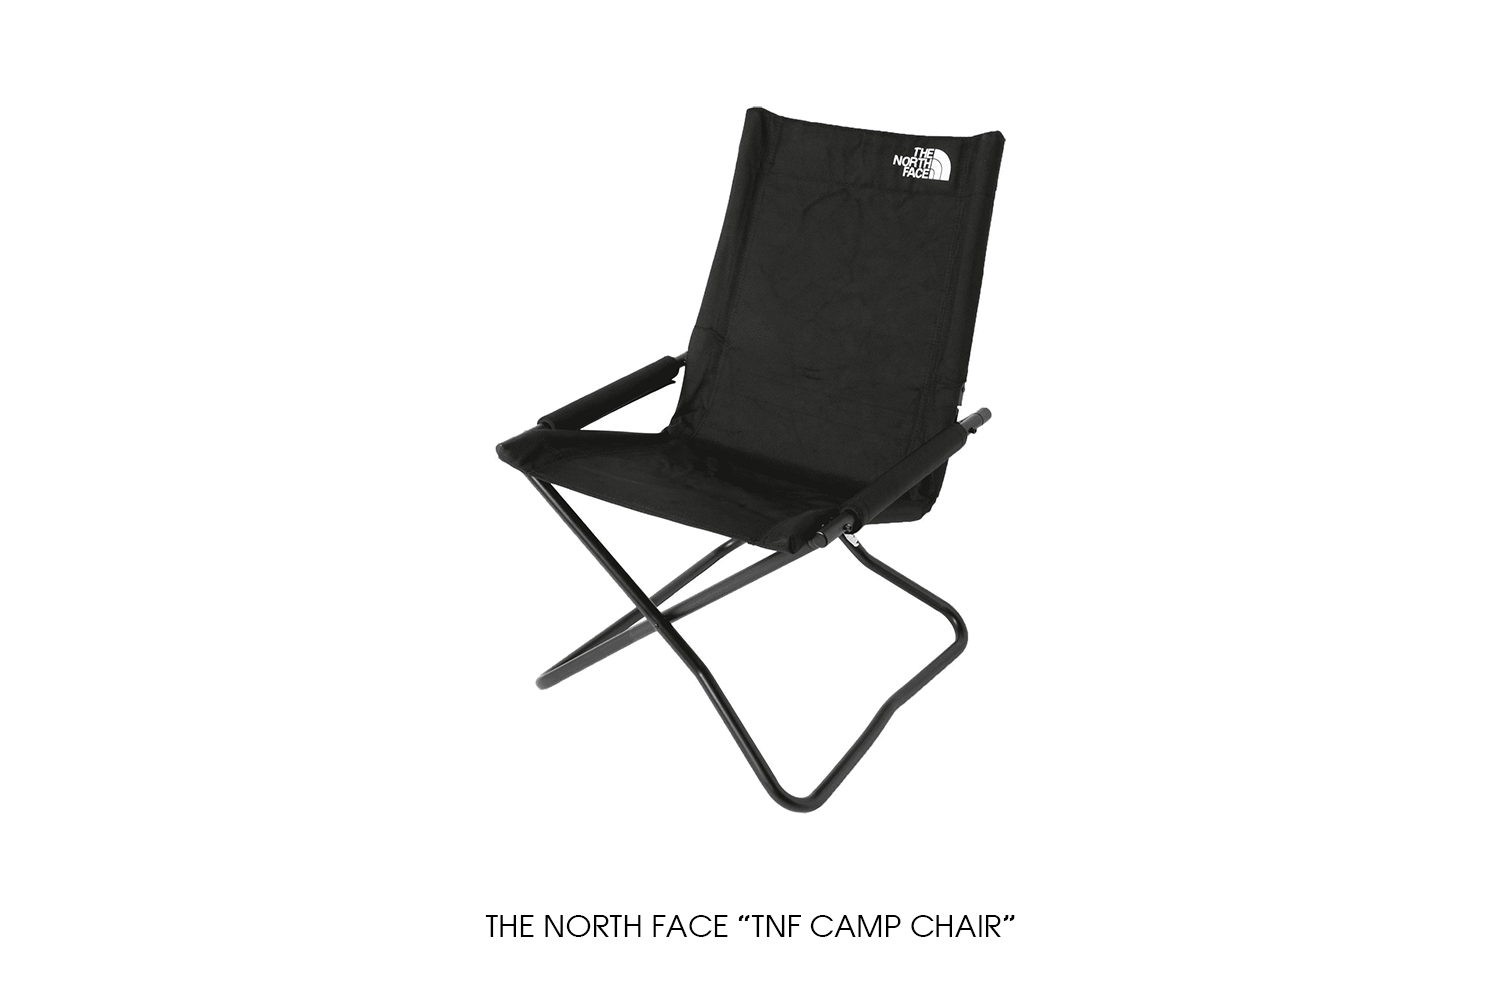 THE NORTH FACE "TNF Camp Chair"